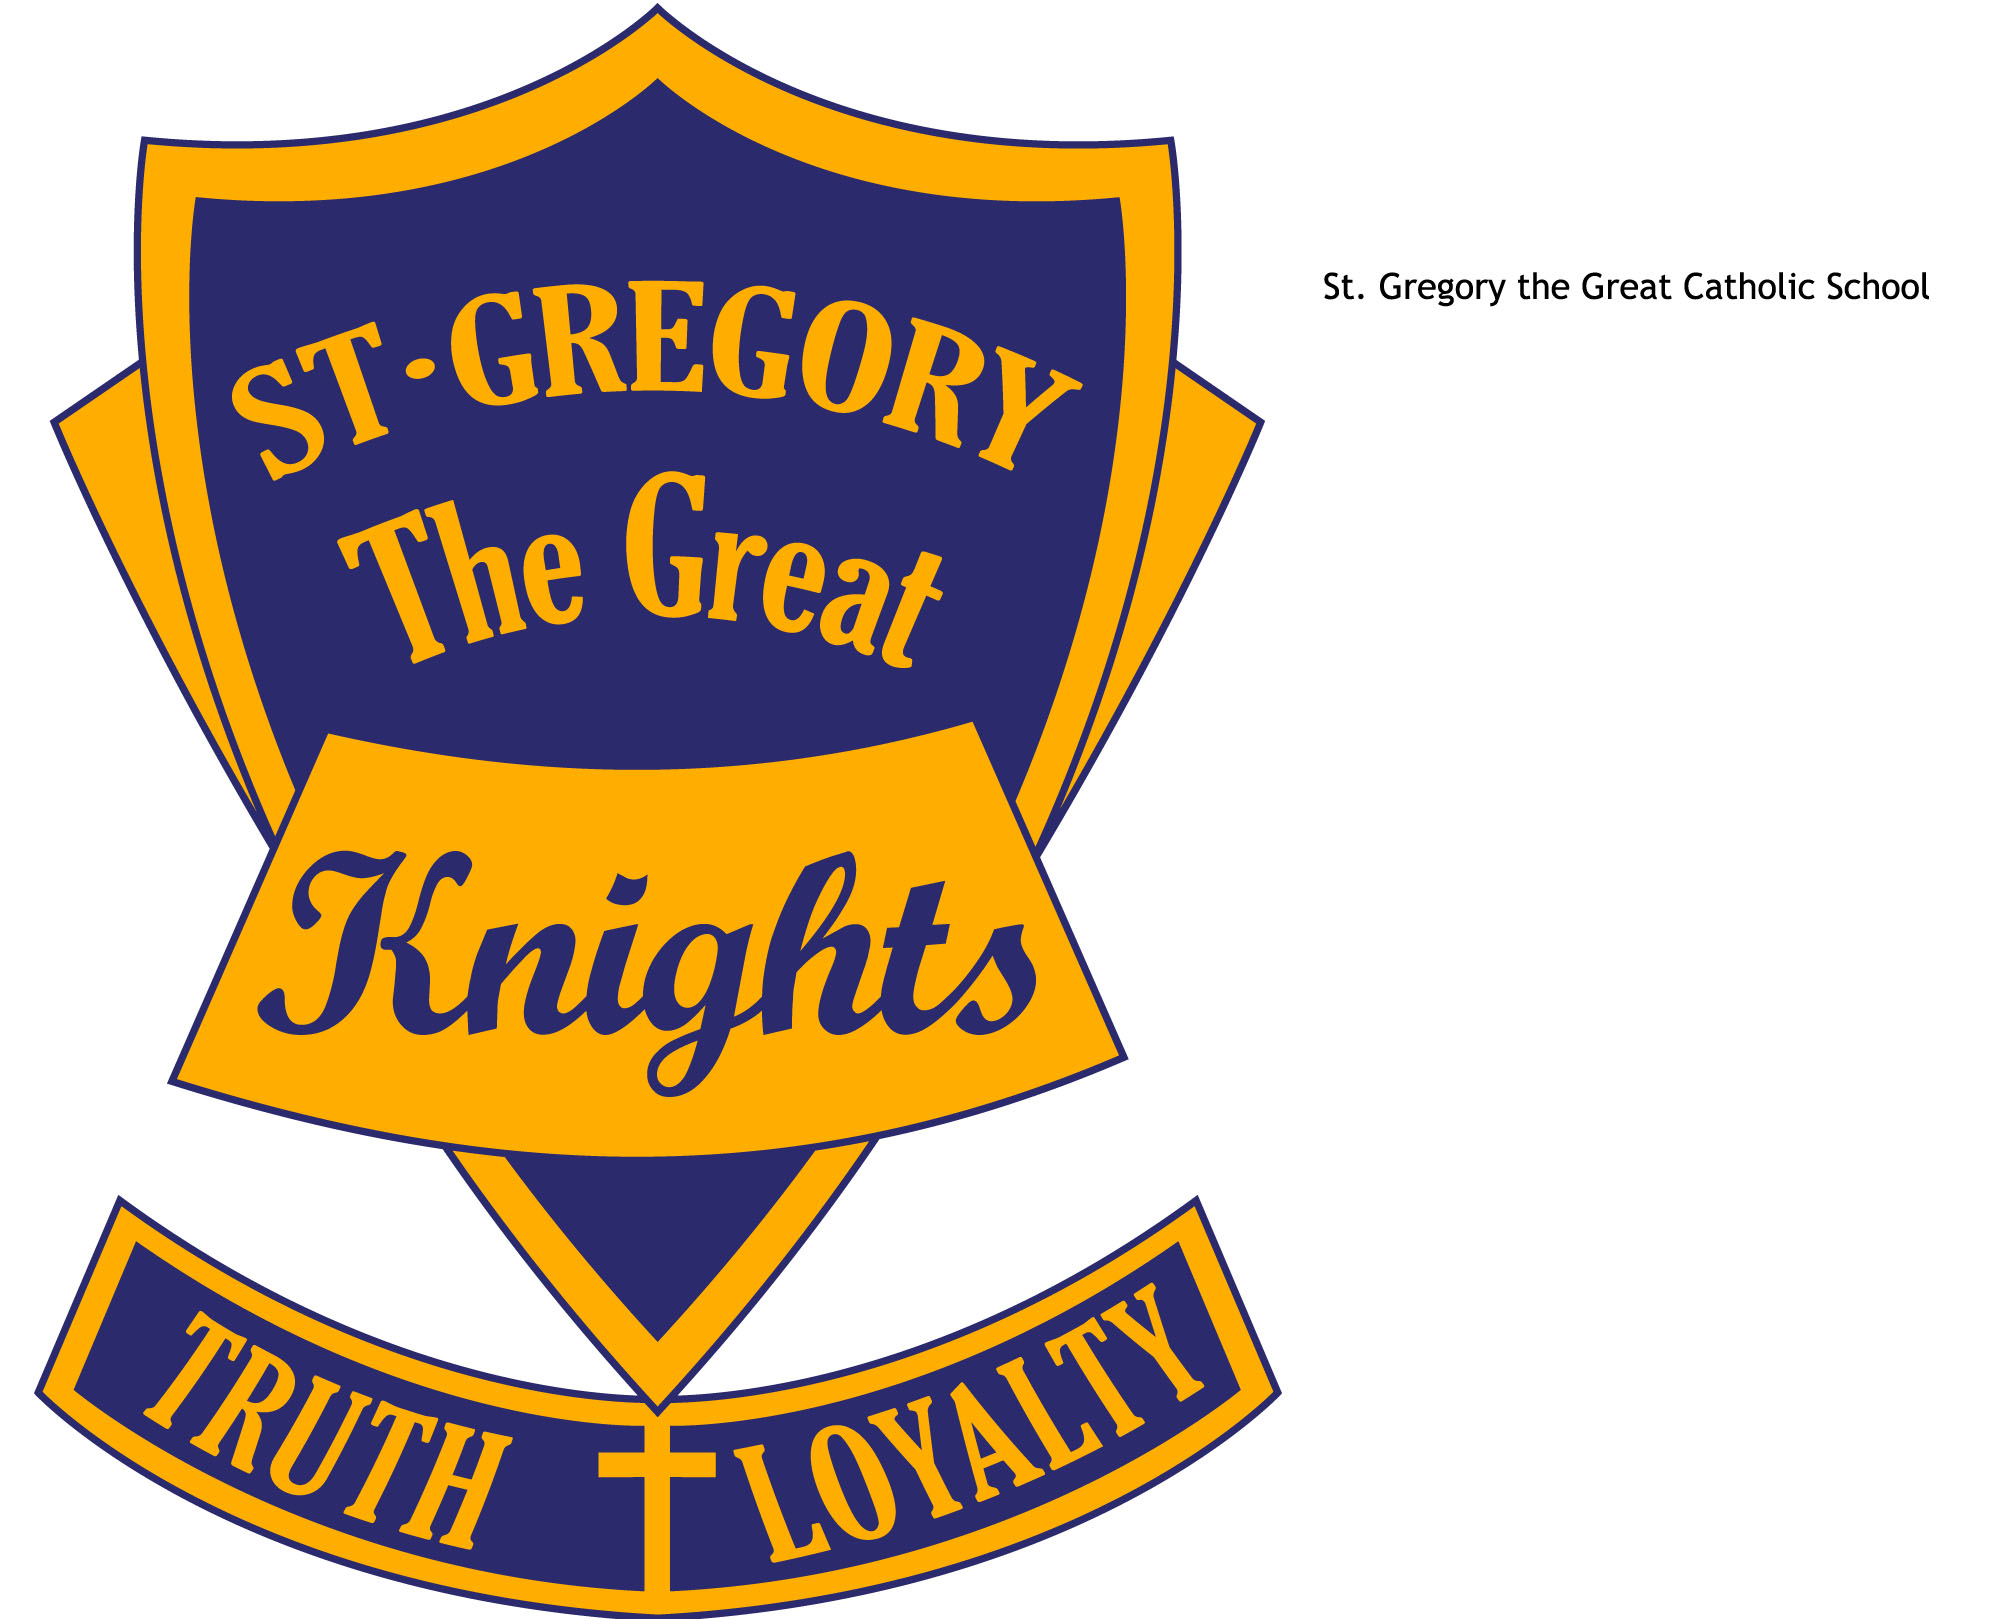 St. Gregory the Great Elementary School